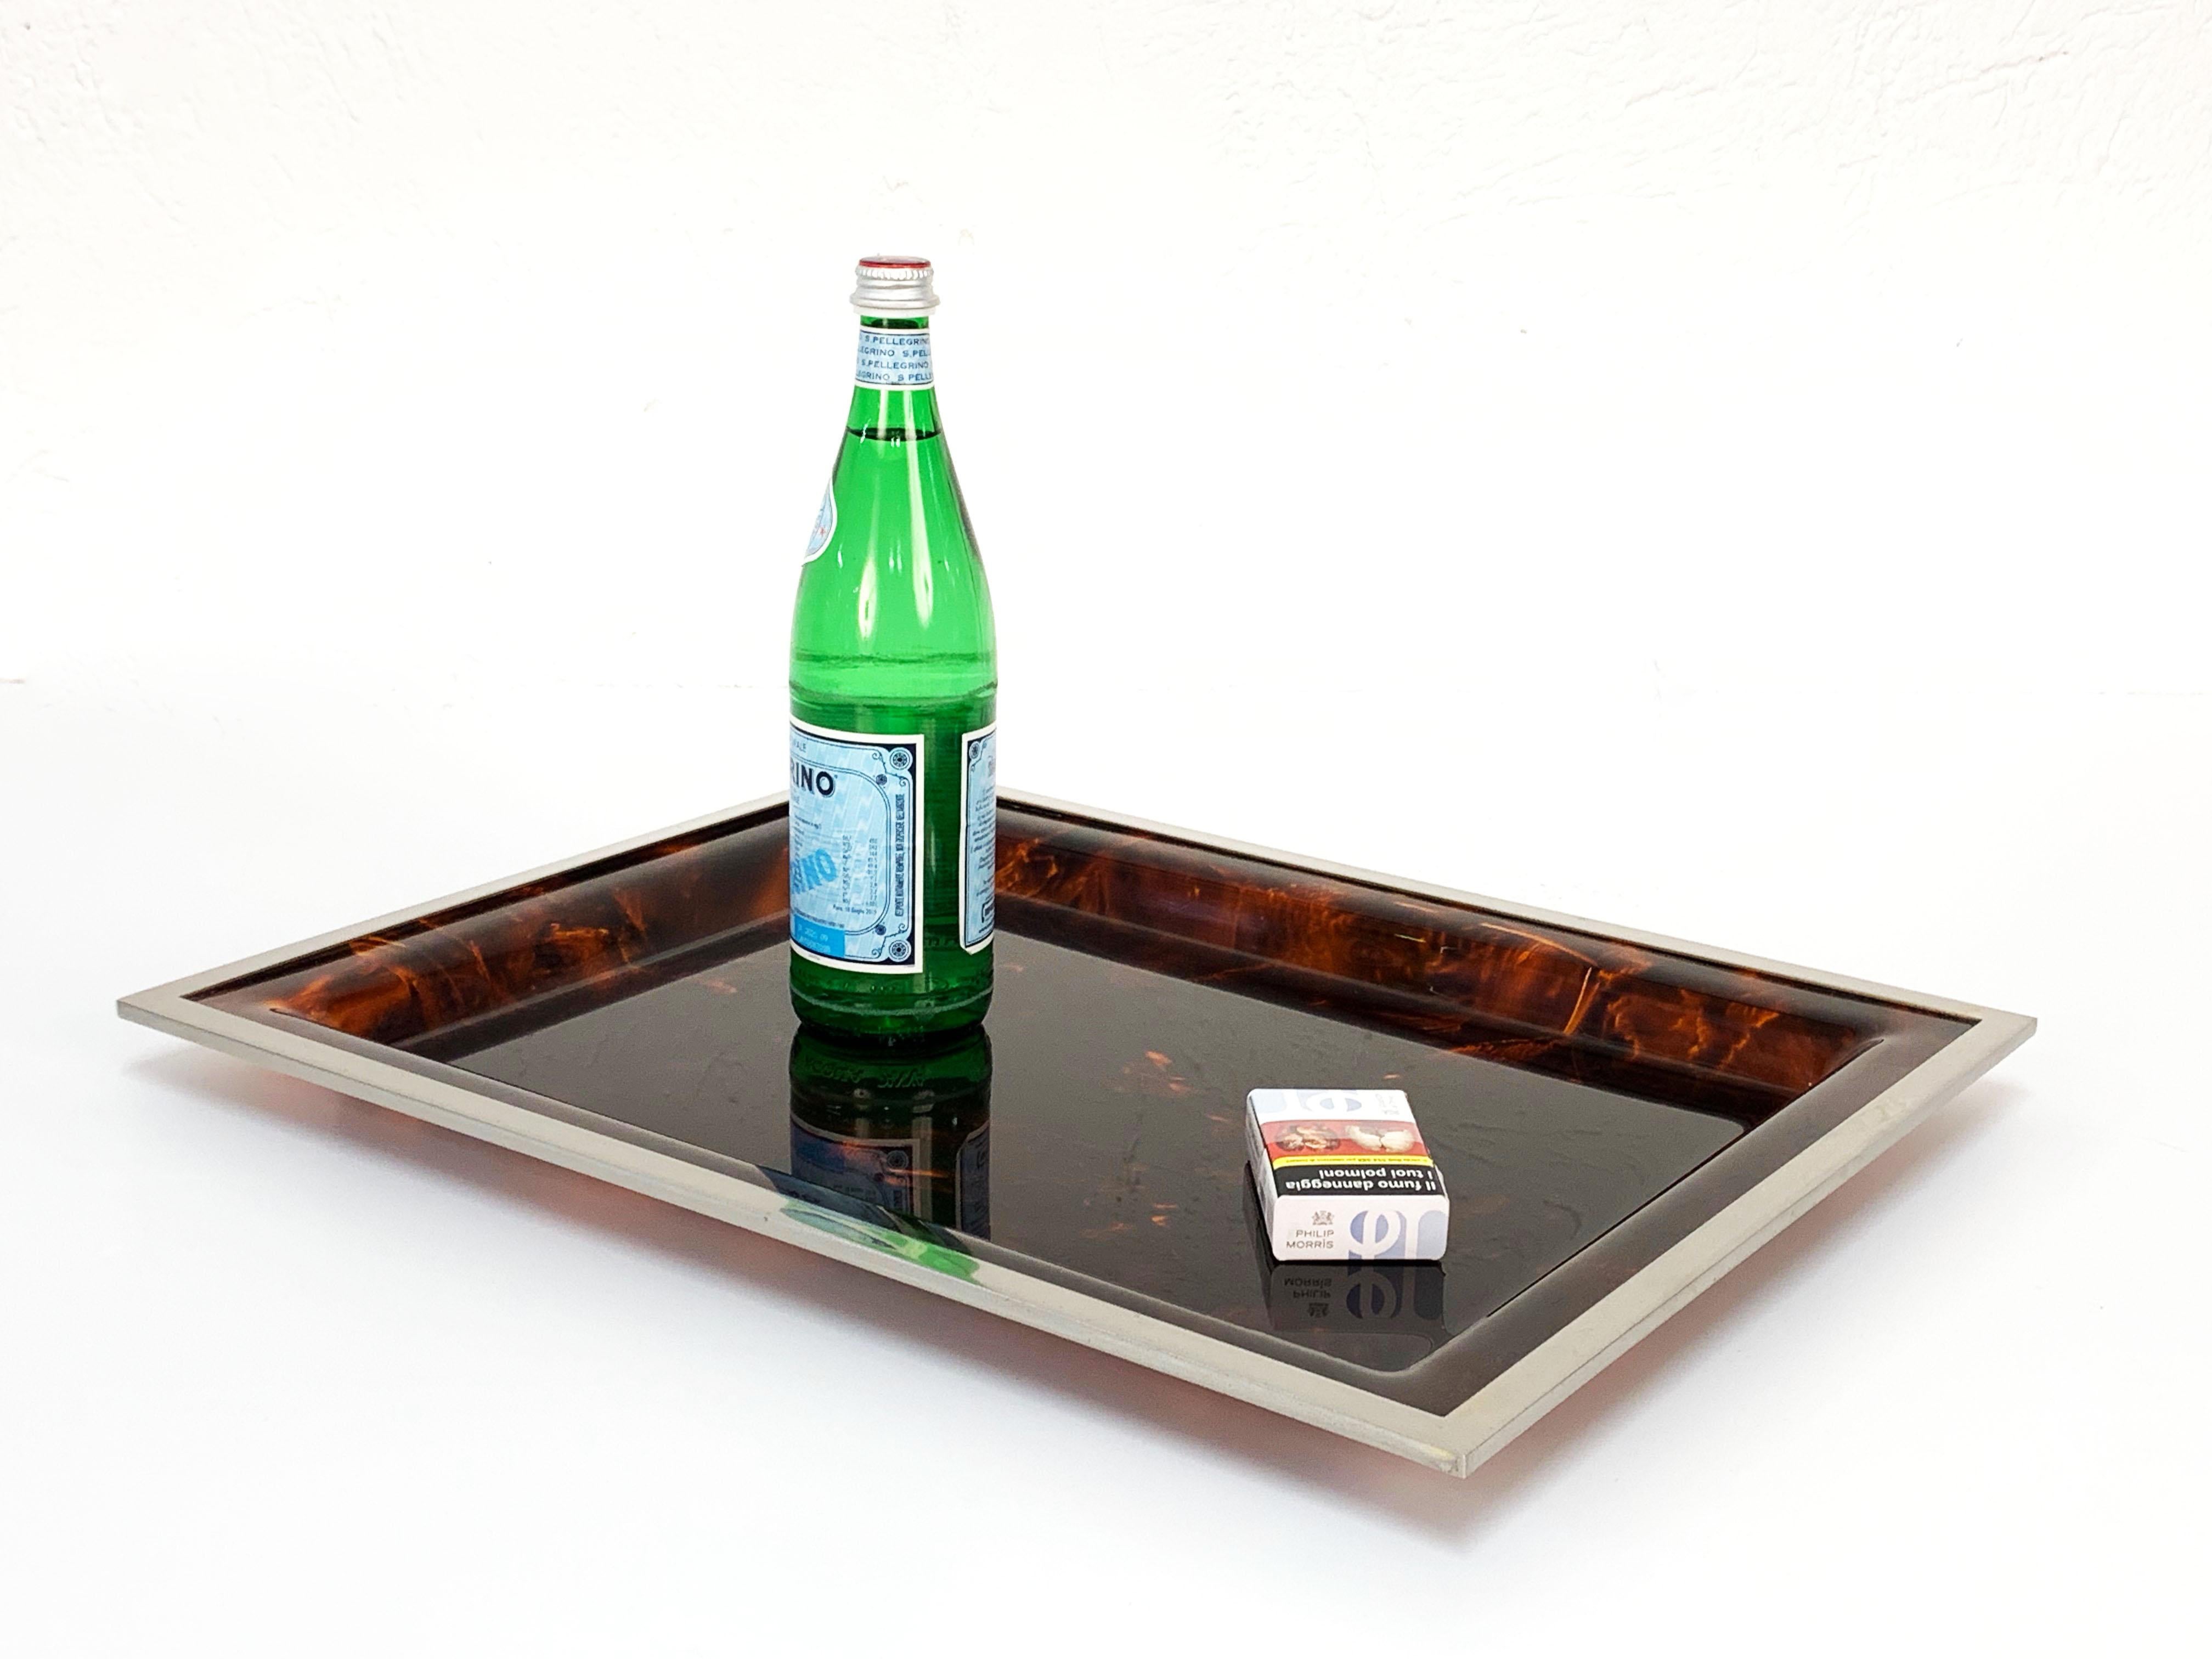 Midcentury Tortoiseshell and Lucite Italian Serving Tray after Willy Rizzo 1970s 1